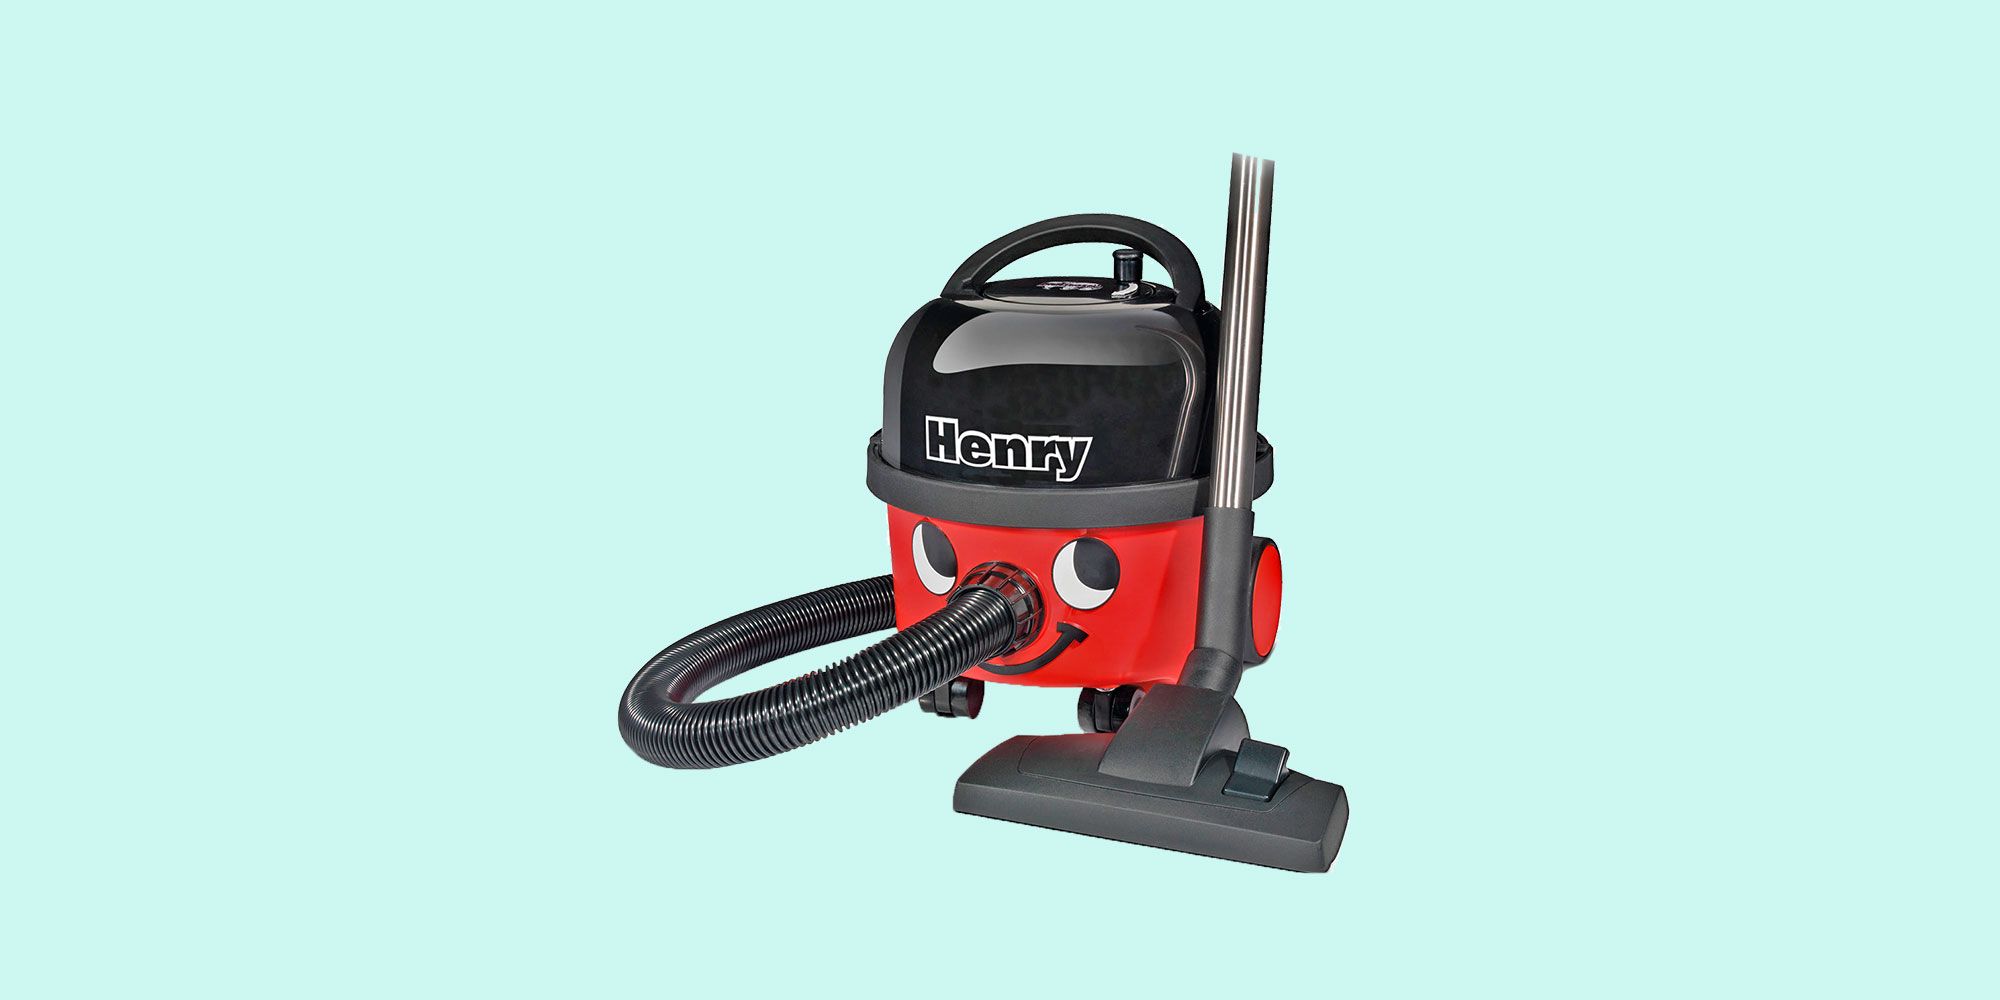 red henry hoover vacum cleaner, 1200 watt motor, for domestic and  commercial use